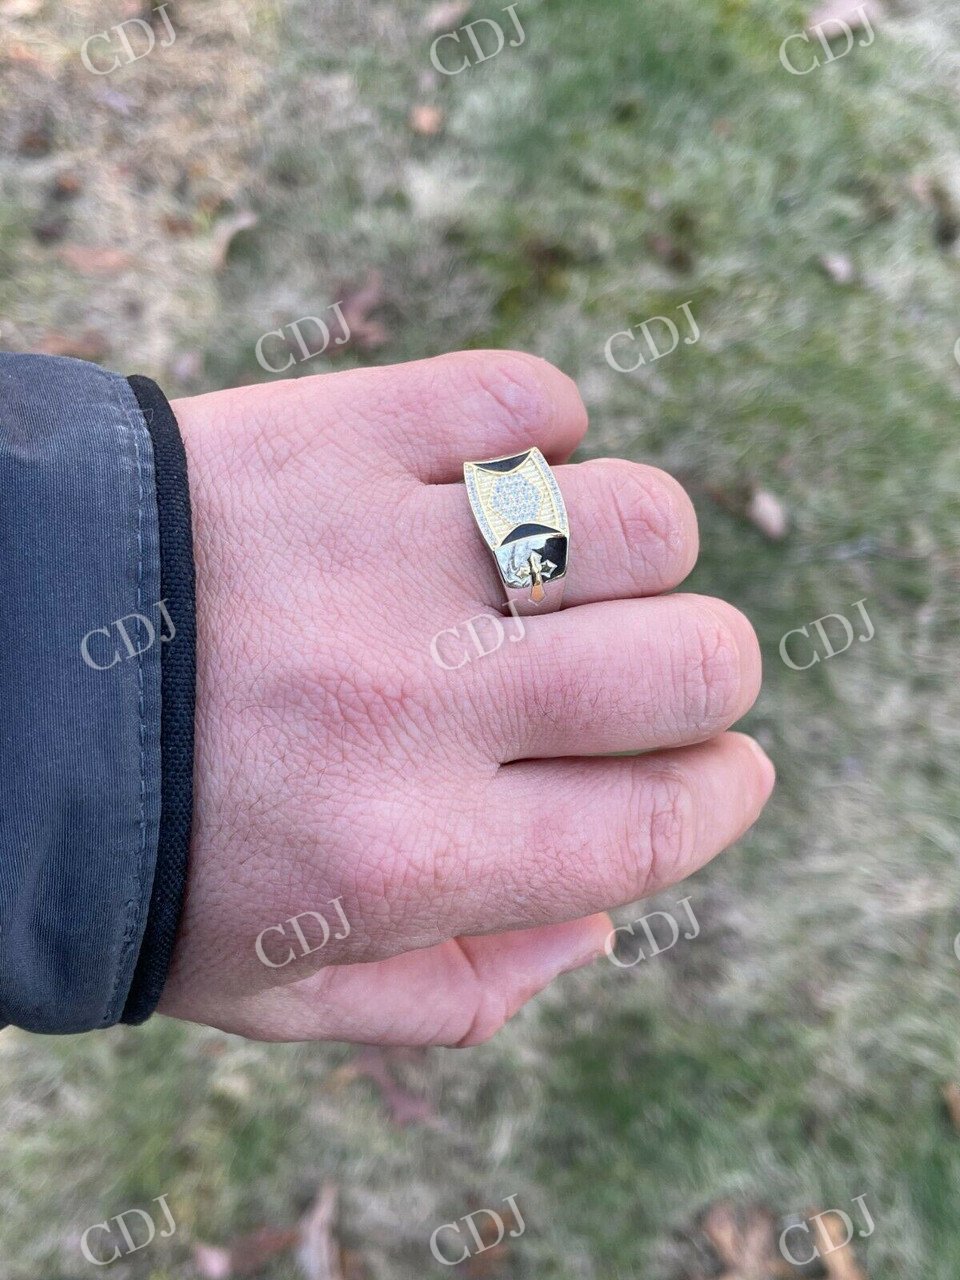 Mens Bling Two Tone Iced Out Hip Hop Ring  customdiamjewel   